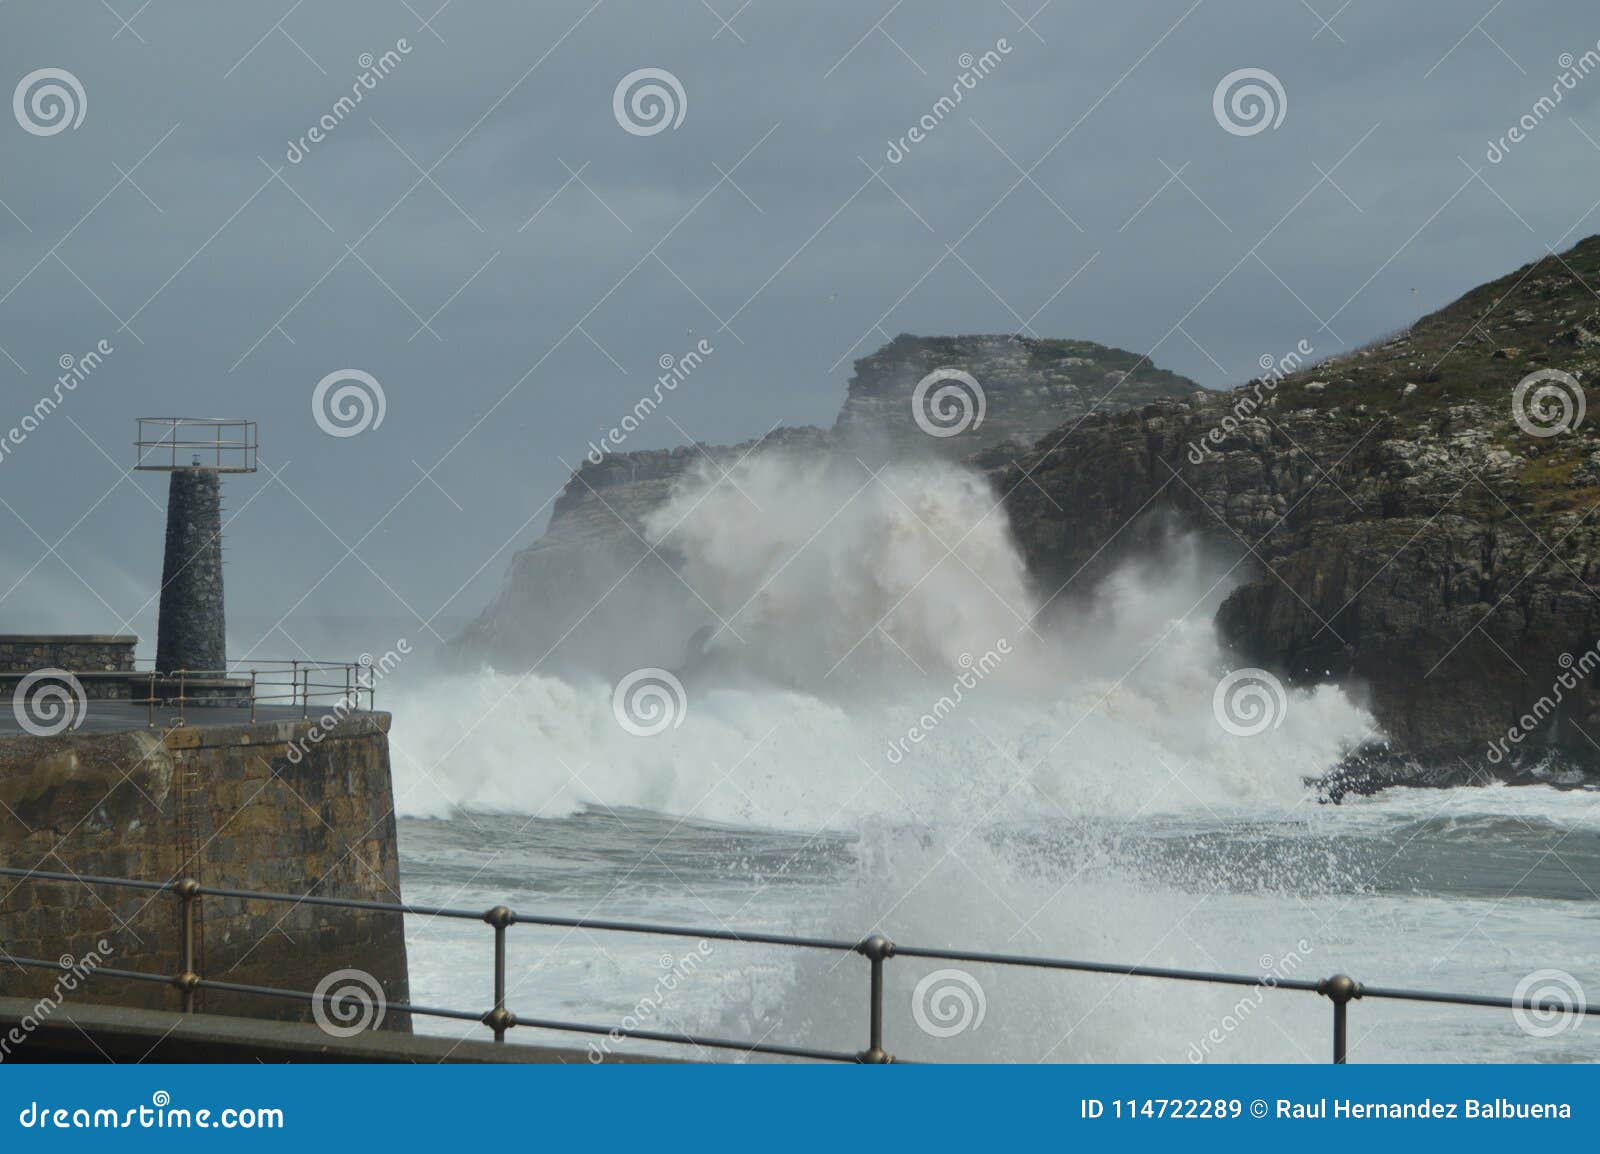 wonderful snapshots taken in the port of lekeitio of huracan hugo breaking its waves against the port and the rocks of the place.